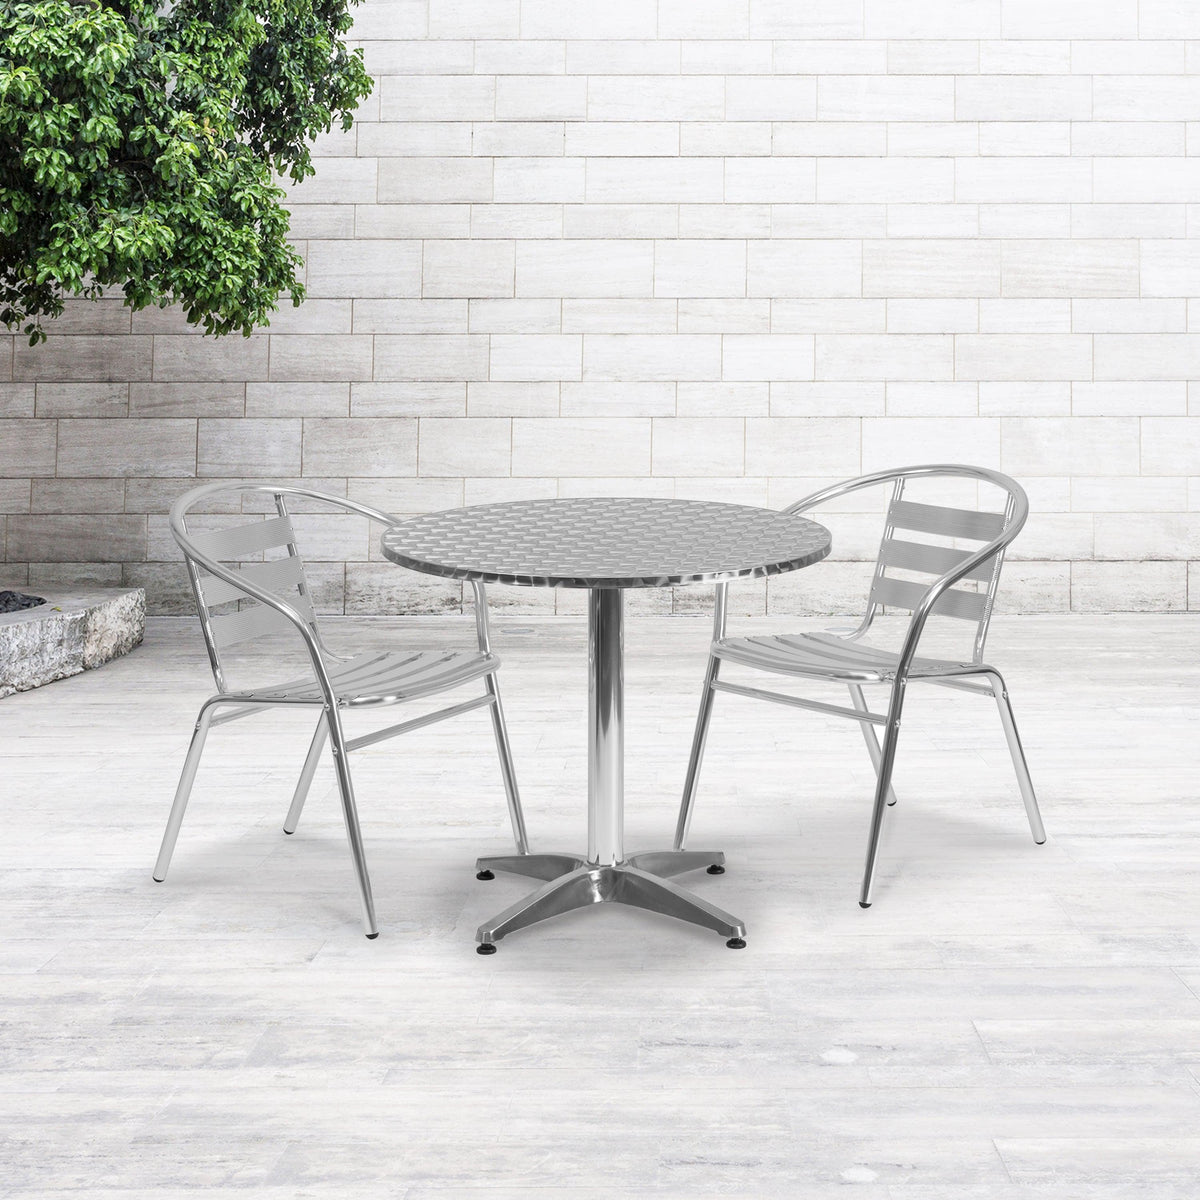 31.5inch Round Aluminum Indoor-Outdoor Table Set with 2 Slat Back Chairs